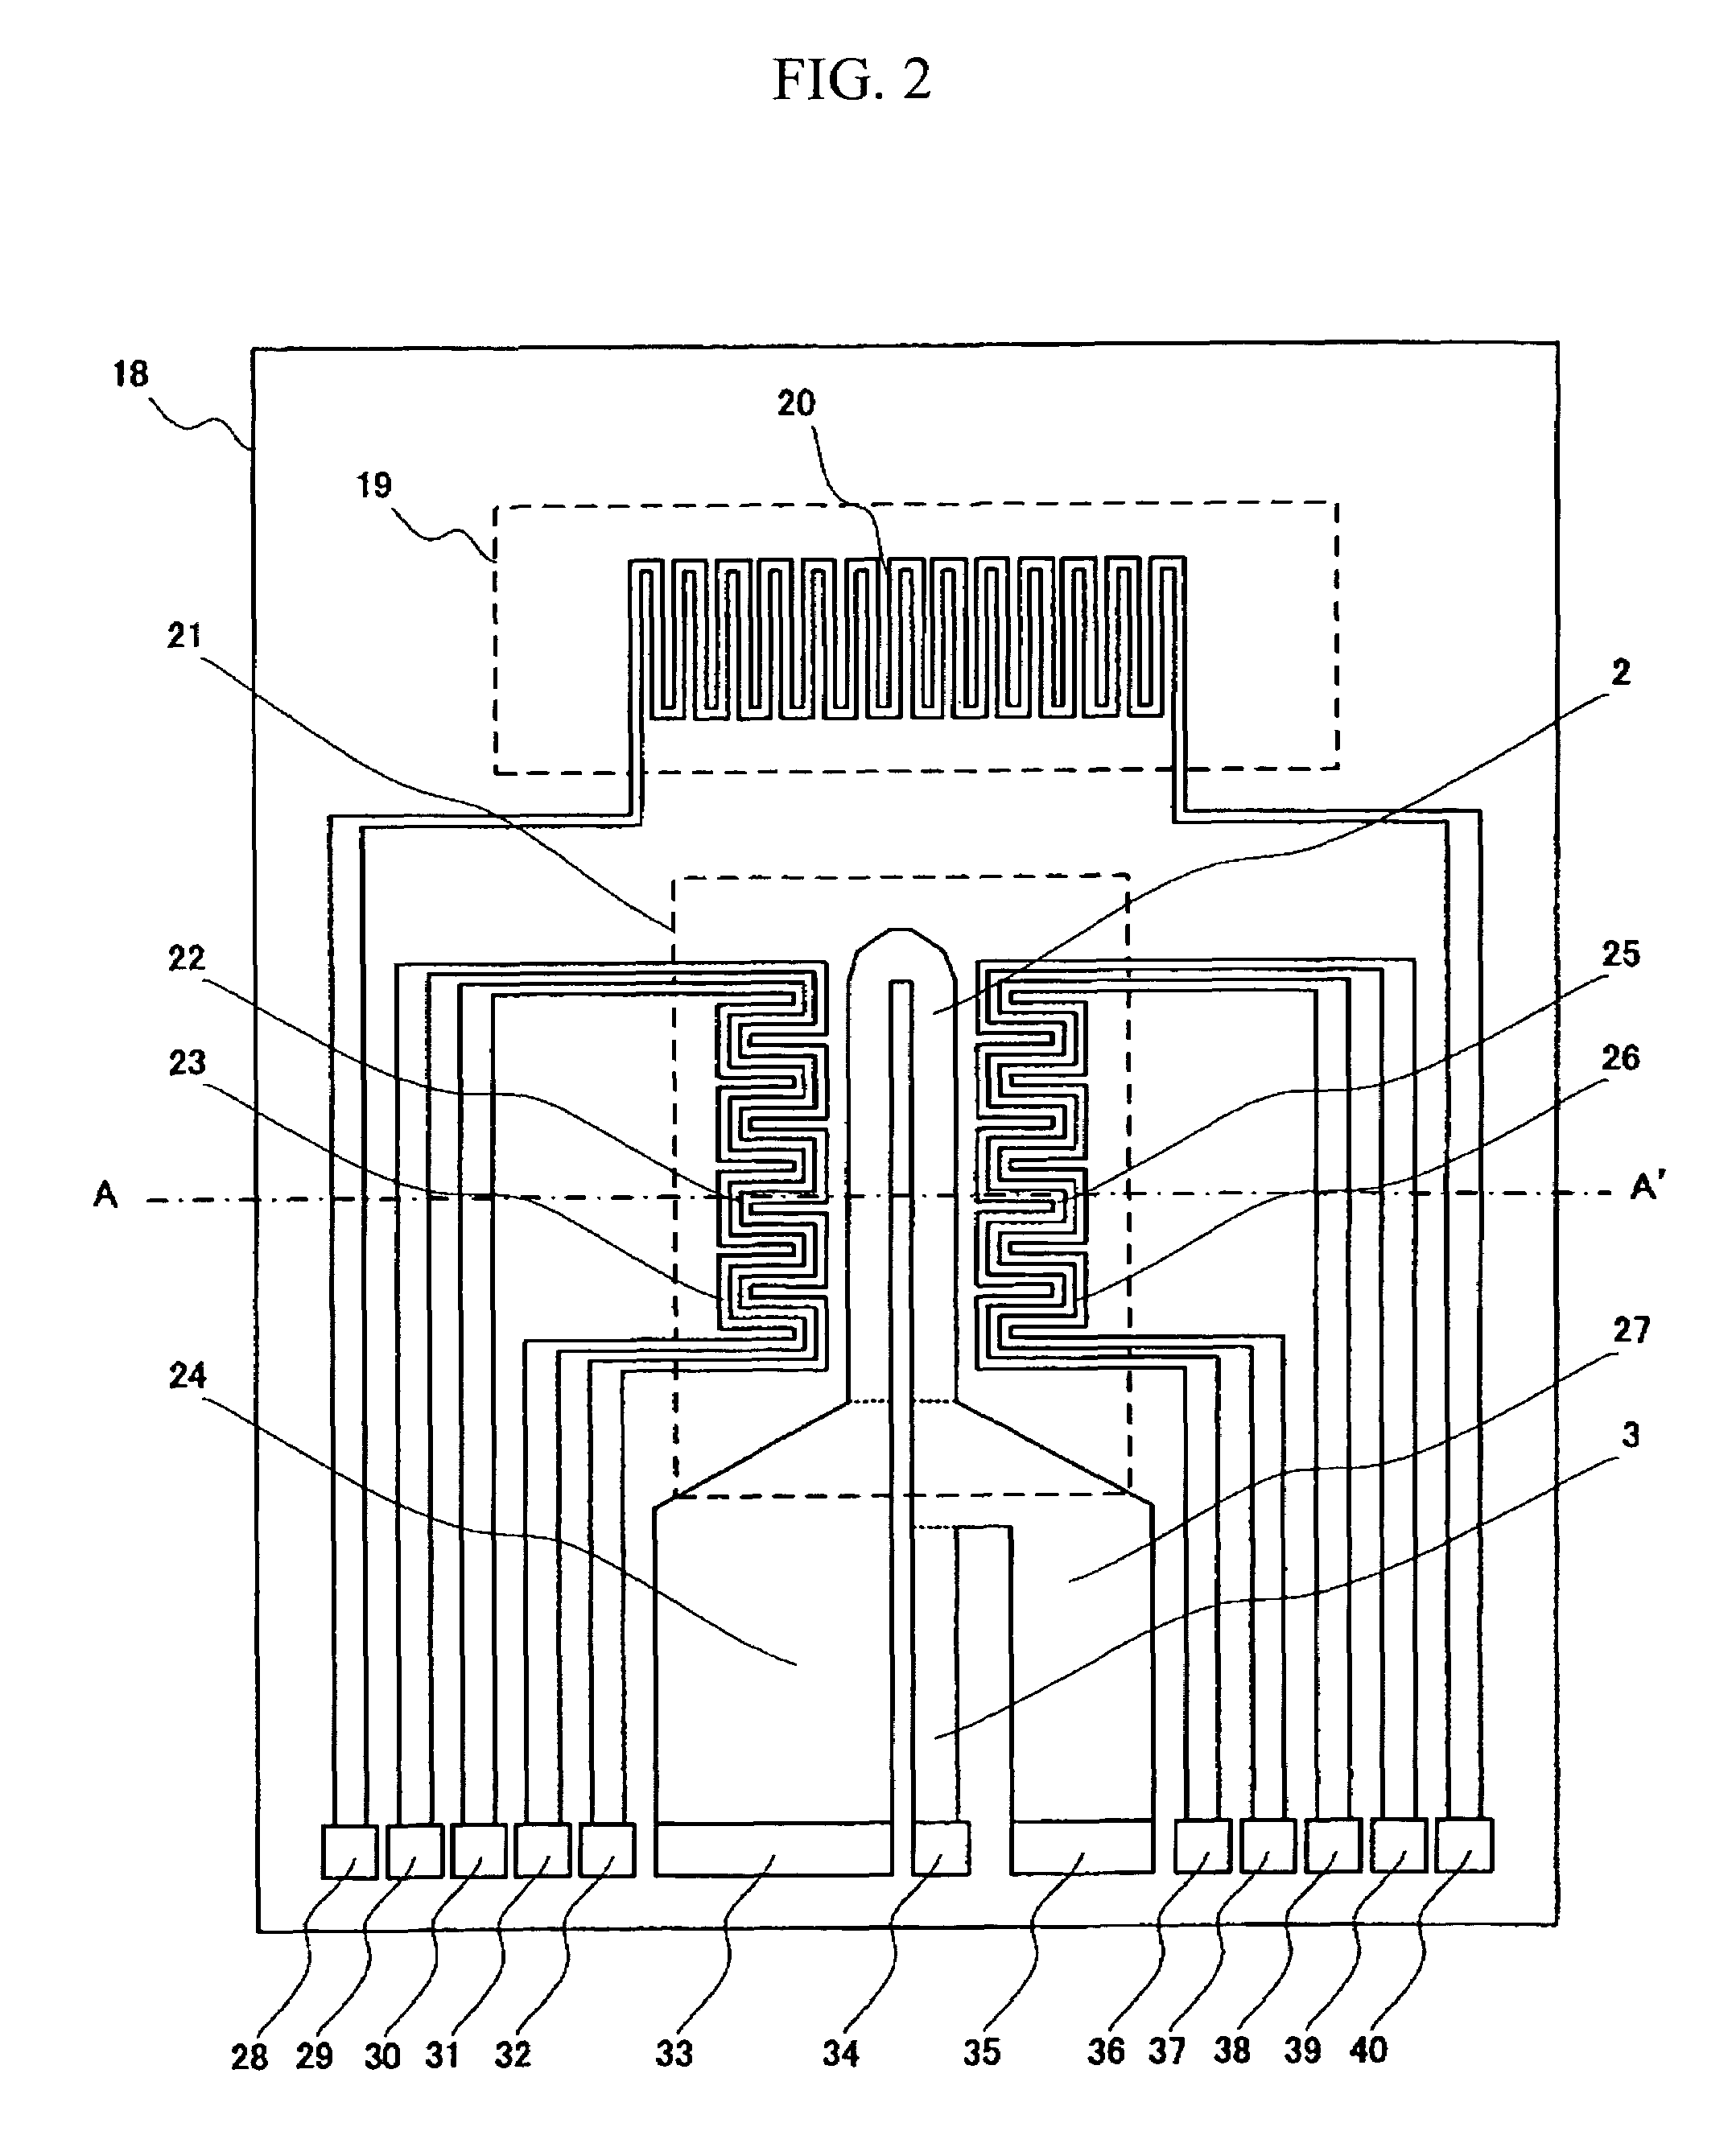 Heating resistor type flow-measuring device having a heating resistor and a thermoresistance, whose resistance value varies in response to the ambient temperature